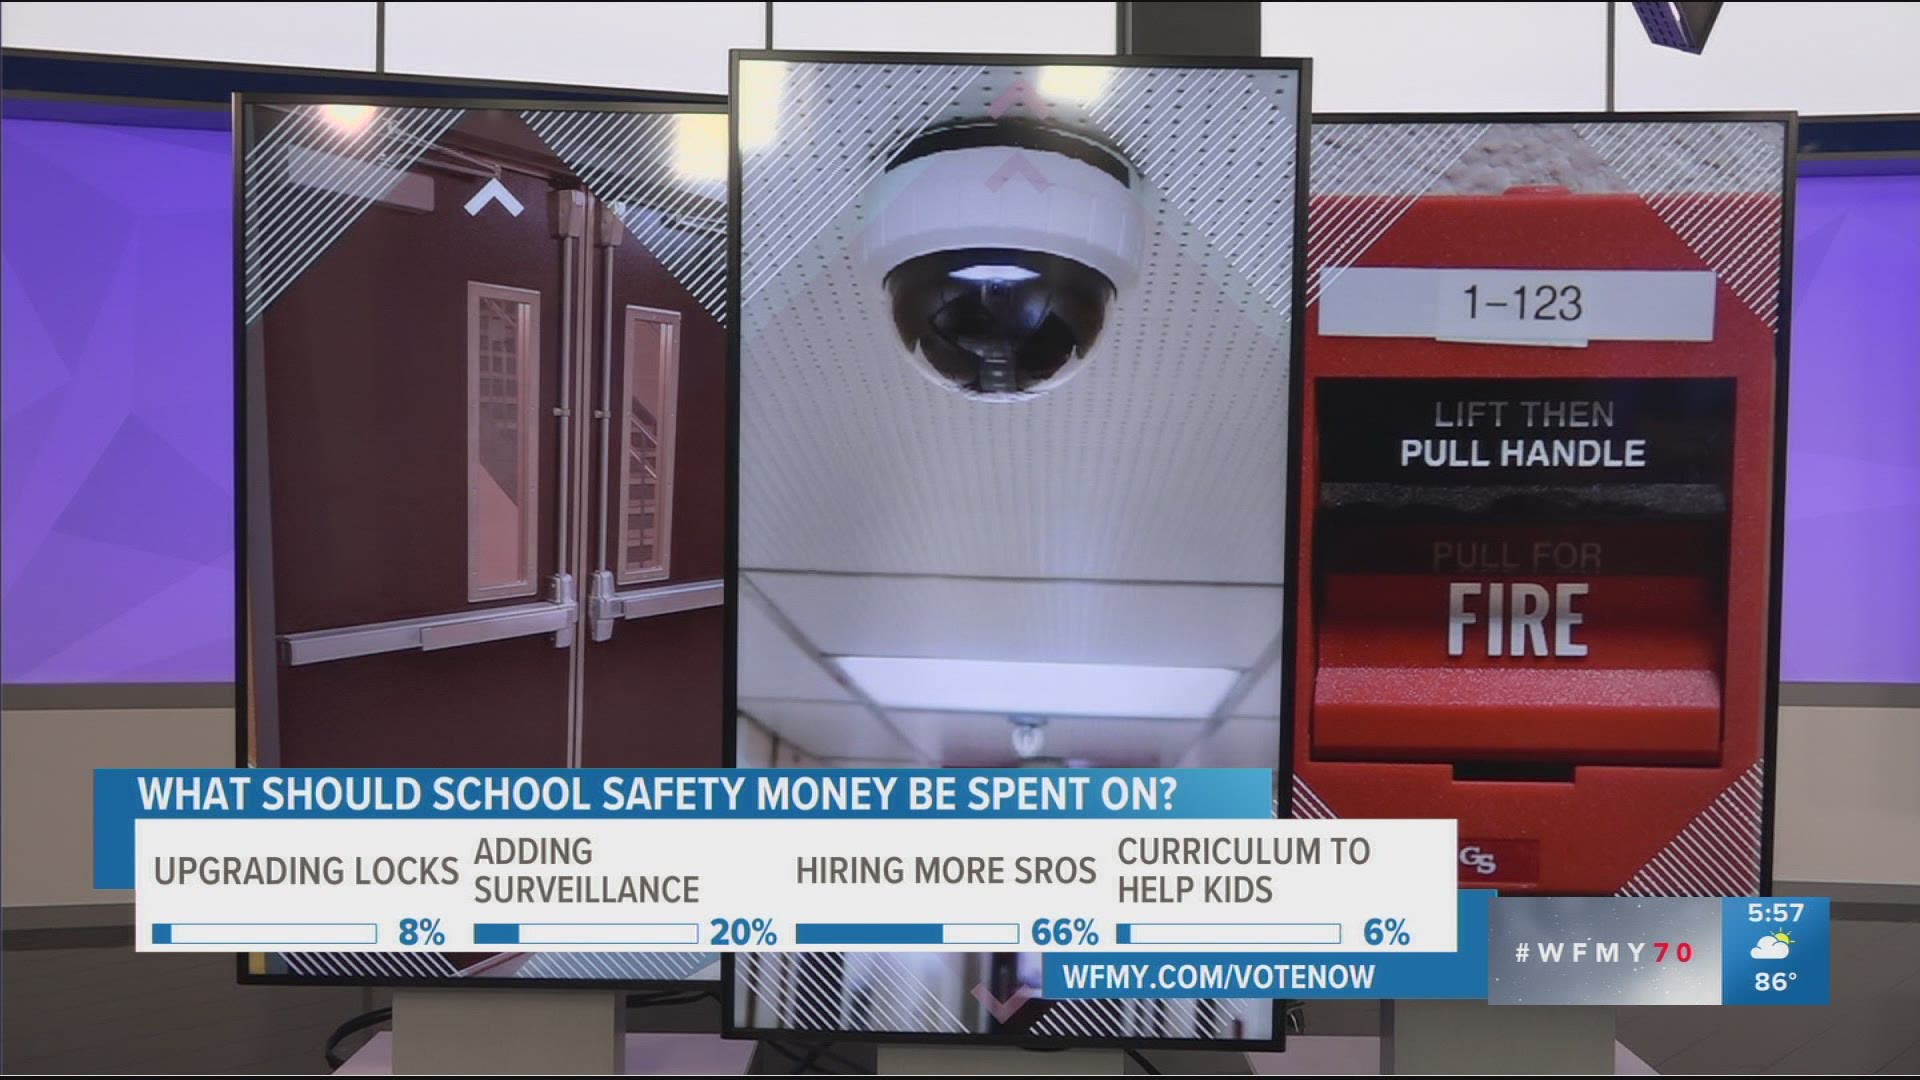 Chief Operations Officer Scott MCCully says last year buzzer systems were installed in every school automatically locking front doors, but there's still more to do.